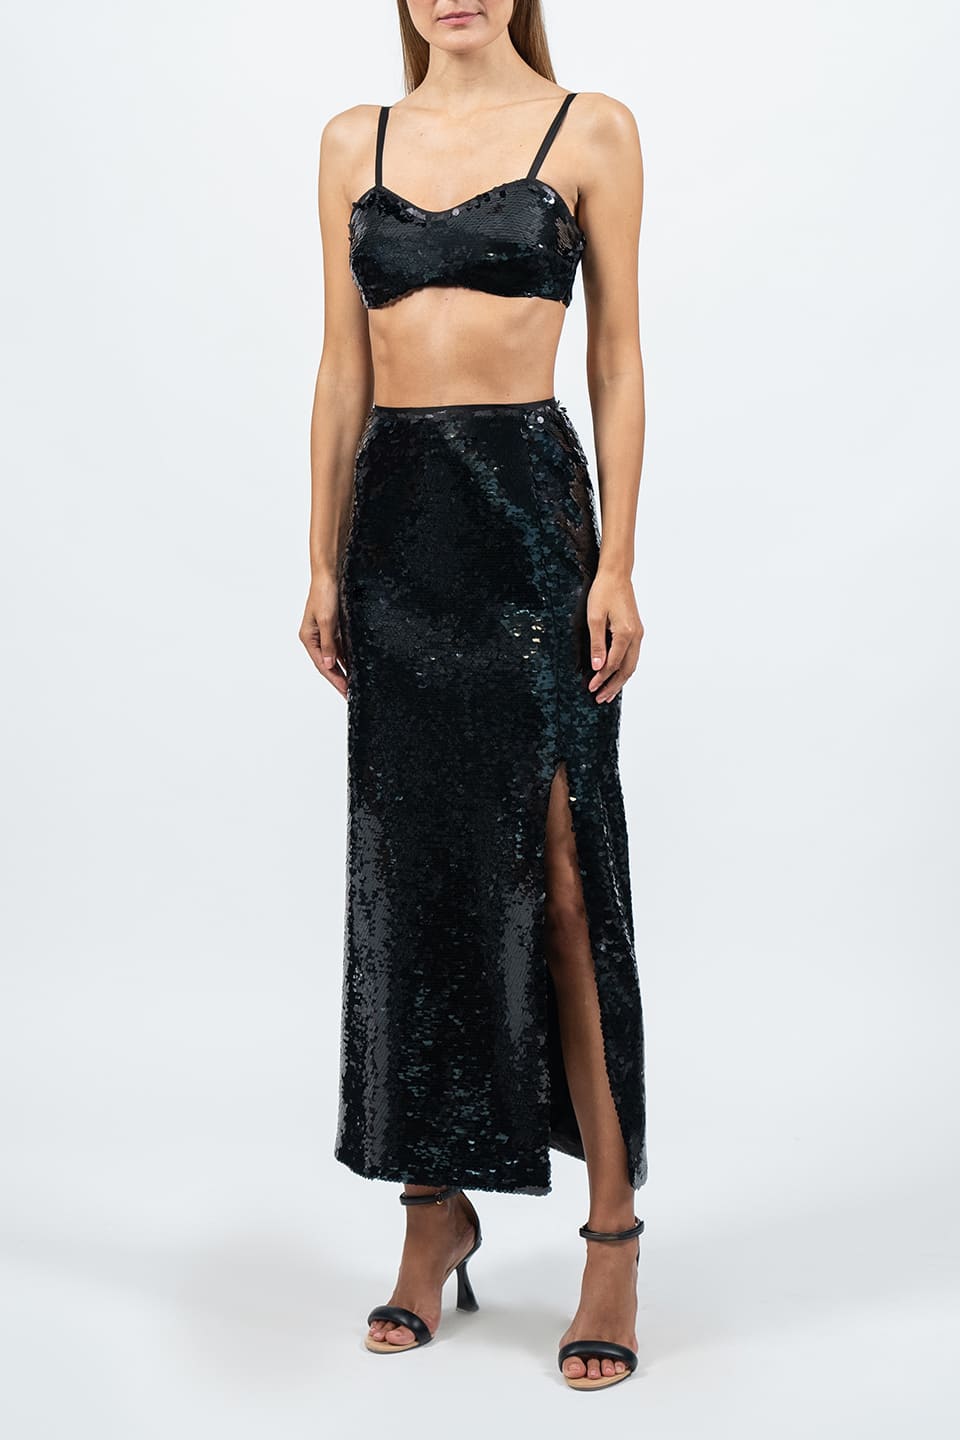 Thumbnail for Product gallery 5, Black Sequin Crop Top